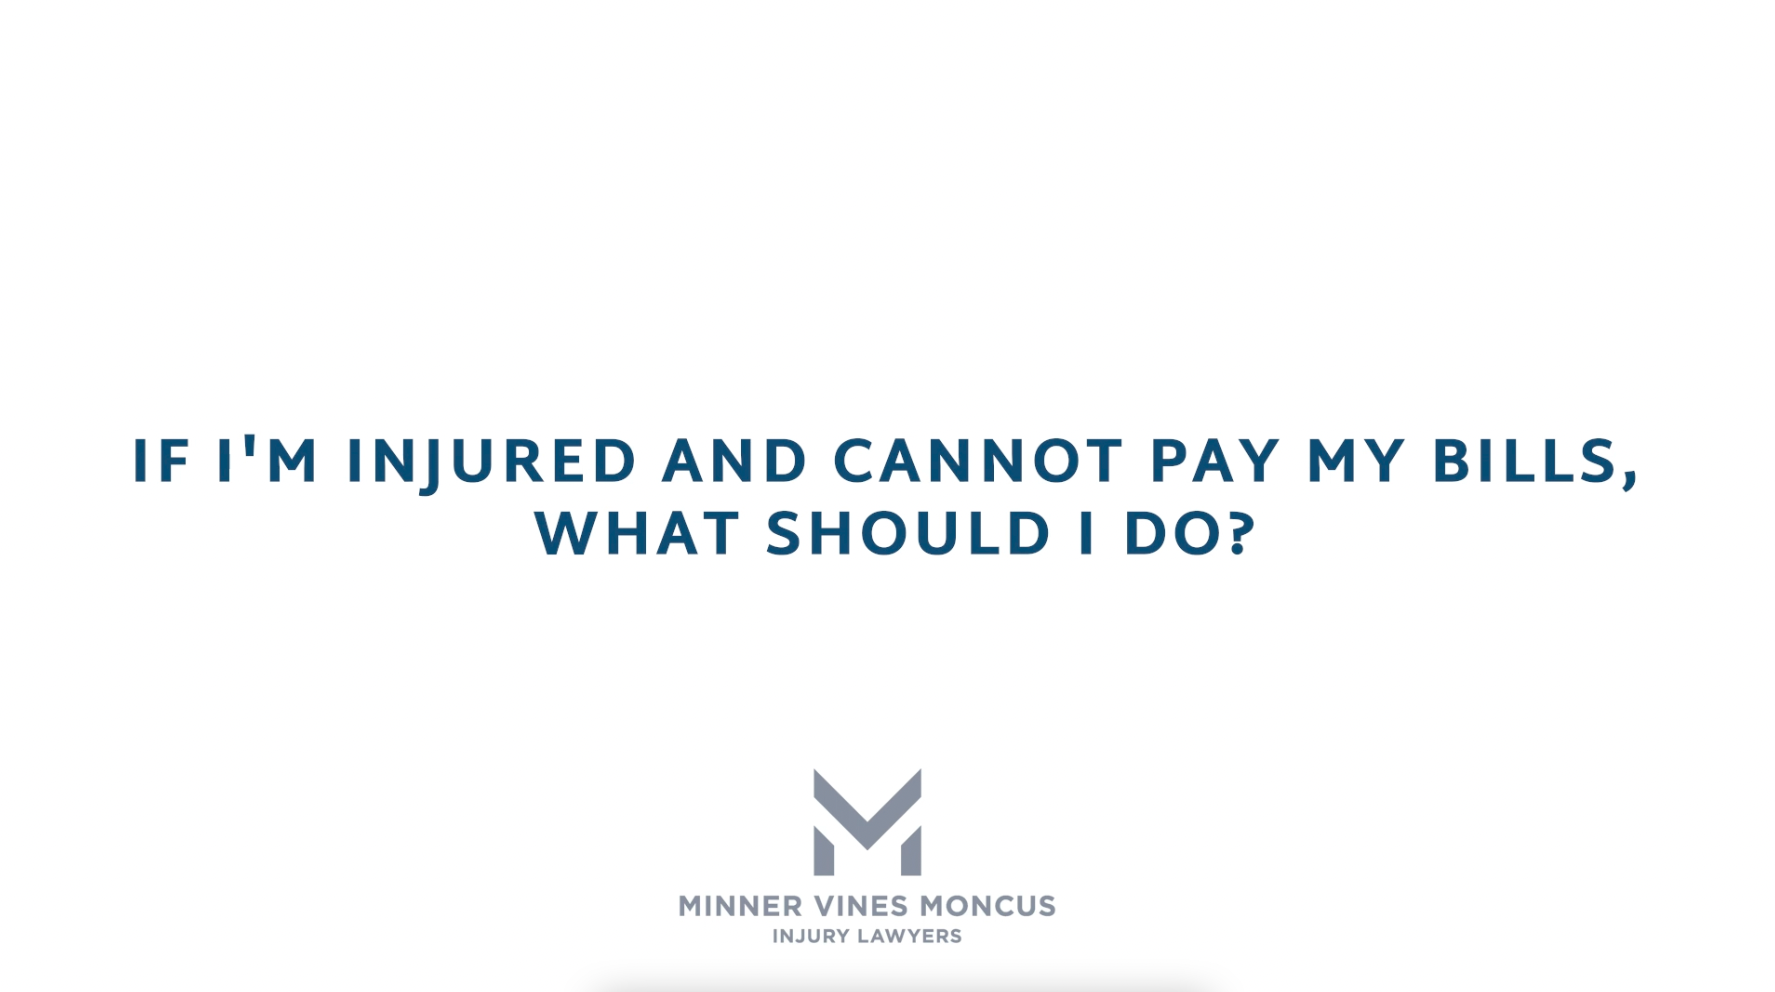 If I’m injured and cannot pay my bills, what should I do?